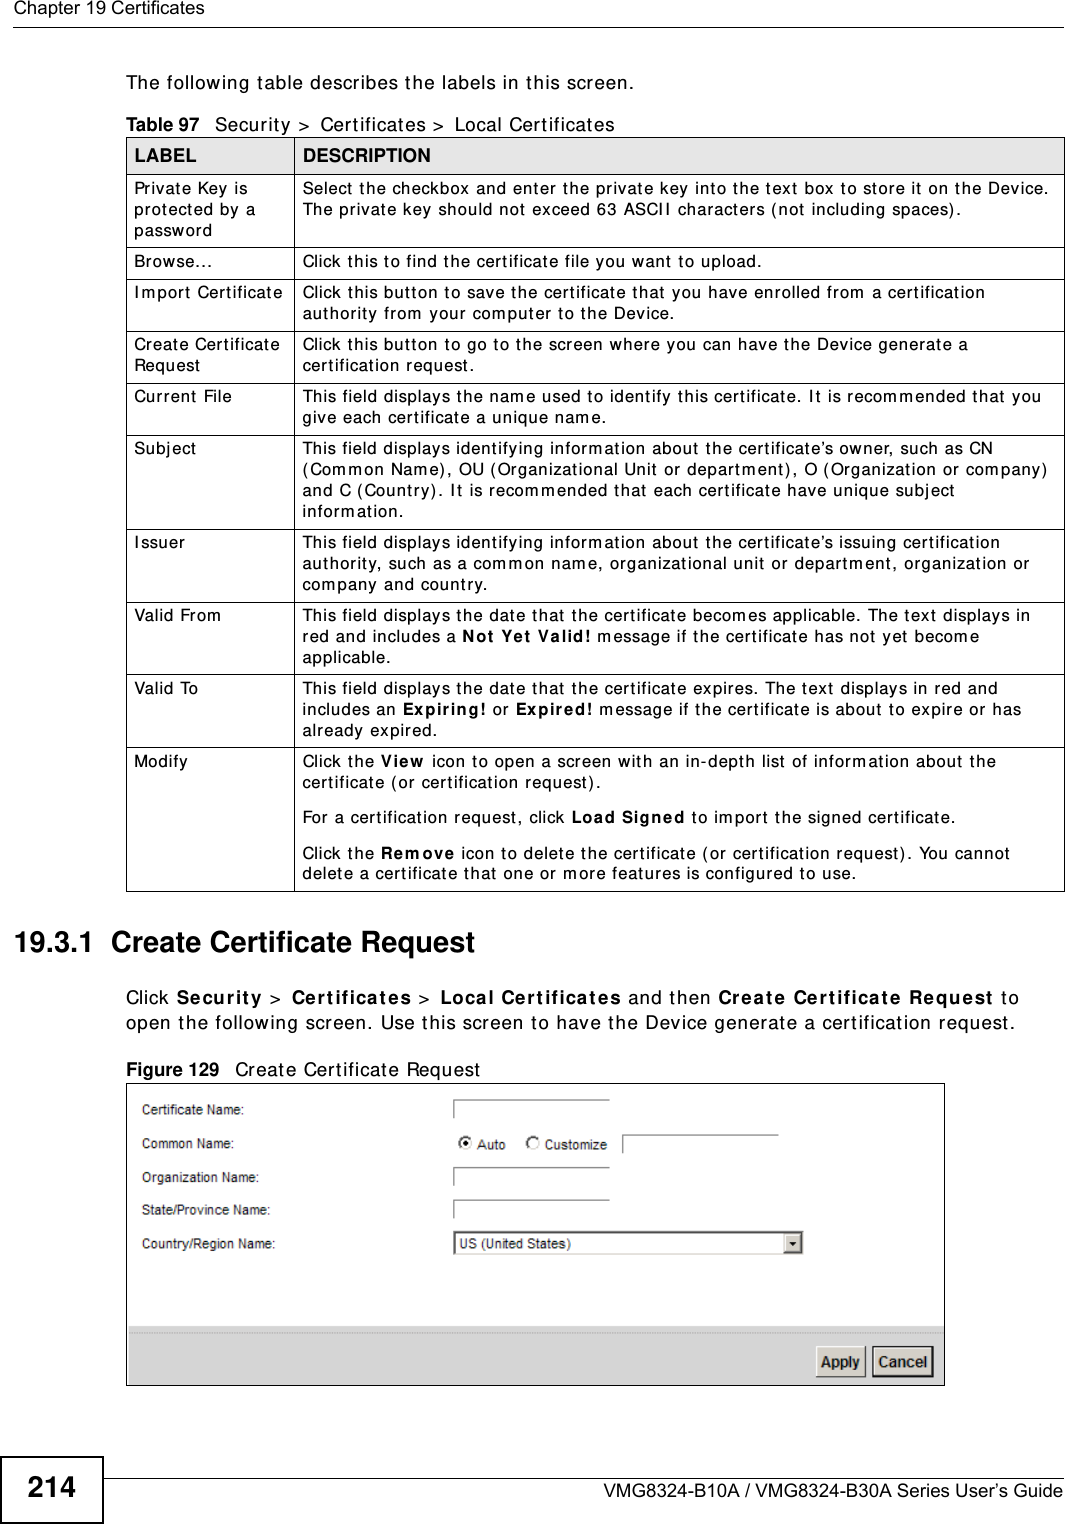 Chapter 19 CertificatesVMG8324-B10A / VMG8324-B30A Series User’s Guide214The following t able describes the labels in t his screen. 19.3.1  Create Certificate Request Click Se cu r it y  &gt;  Ce rt if ica t e s &gt;  Loca l Cert ifica te s and then Cre at e Ce rtificat e Reque st  to open the following screen. Use t his screen to have the Device generate a cert ificat ion request .Figure 129   Creat e Cert ificat e RequestTable 97   Secur ity &gt;  Cer t ificat es &gt;  Local CertificatesLABEL DESCRIPTIONPrivat e Key is protected by a passwordSelect the checkbox and ent er t he privat e key int o the t ext box  to st or e it  on the Device. The private key should not exceed 63 ASCII  charact ers (not  including spaces) . Browse... Click this t o find t he cert ificat e file you want t o upload. I m por t  Certificate Click this but t on t o save the cert ificat e that  you have enrolled from  a certification aut hority from  your com put er t o the Device.Create Certificate RequestClick t his but ton to go t o the screen where you can have the Device generat e a certification request .Current File This field displays t he nam e used to identify t his certificat e. I t  is r ecom m ended that  you give each certificat e a unique nam e. Subj ect This field displays ident ifying inform at ion about  the certificate’s ow ner,  such as CN ( Com m on Nam e), OU (Organizational Unit  or depart m ent ) , O ( Organizat ion or  com pany)  and C ( Country). I t is recom m ended t hat each cert ificat e have unique subject  inform at ion. I ssuer This field displays identifying inform at ion about t he certificate’s issuing certification aut hority, such as a com m on nam e, organizat ional unit  or depart m ent , or ganizat ion or com pany and country.Valid From This field displays the date t hat  the certificate becom es applicable. The text displays in red and includes a N ot Yet Valid! m essage if t he certificate has not  yet  becom e applicable.Valid To This field displays t he dat e that  t he cert ificat e expires. The t ext  displays in red and includes an Ex pir ing! or Expired! m essage if the cert ificat e is about  to expire or has already expired.Modify Click t he View  icon to open a screen wit h an in- dept h list of inform at ion about the certificate (or certification request).For a cer t ificat ion request, click Load Signed to im port  the signed cert ificate.Click t he Rem ove icon to delete t he cer t ificat e ( or certificat ion request ) . You cannot delete a certificat e that  one or  m ore feat ures is configured t o use.